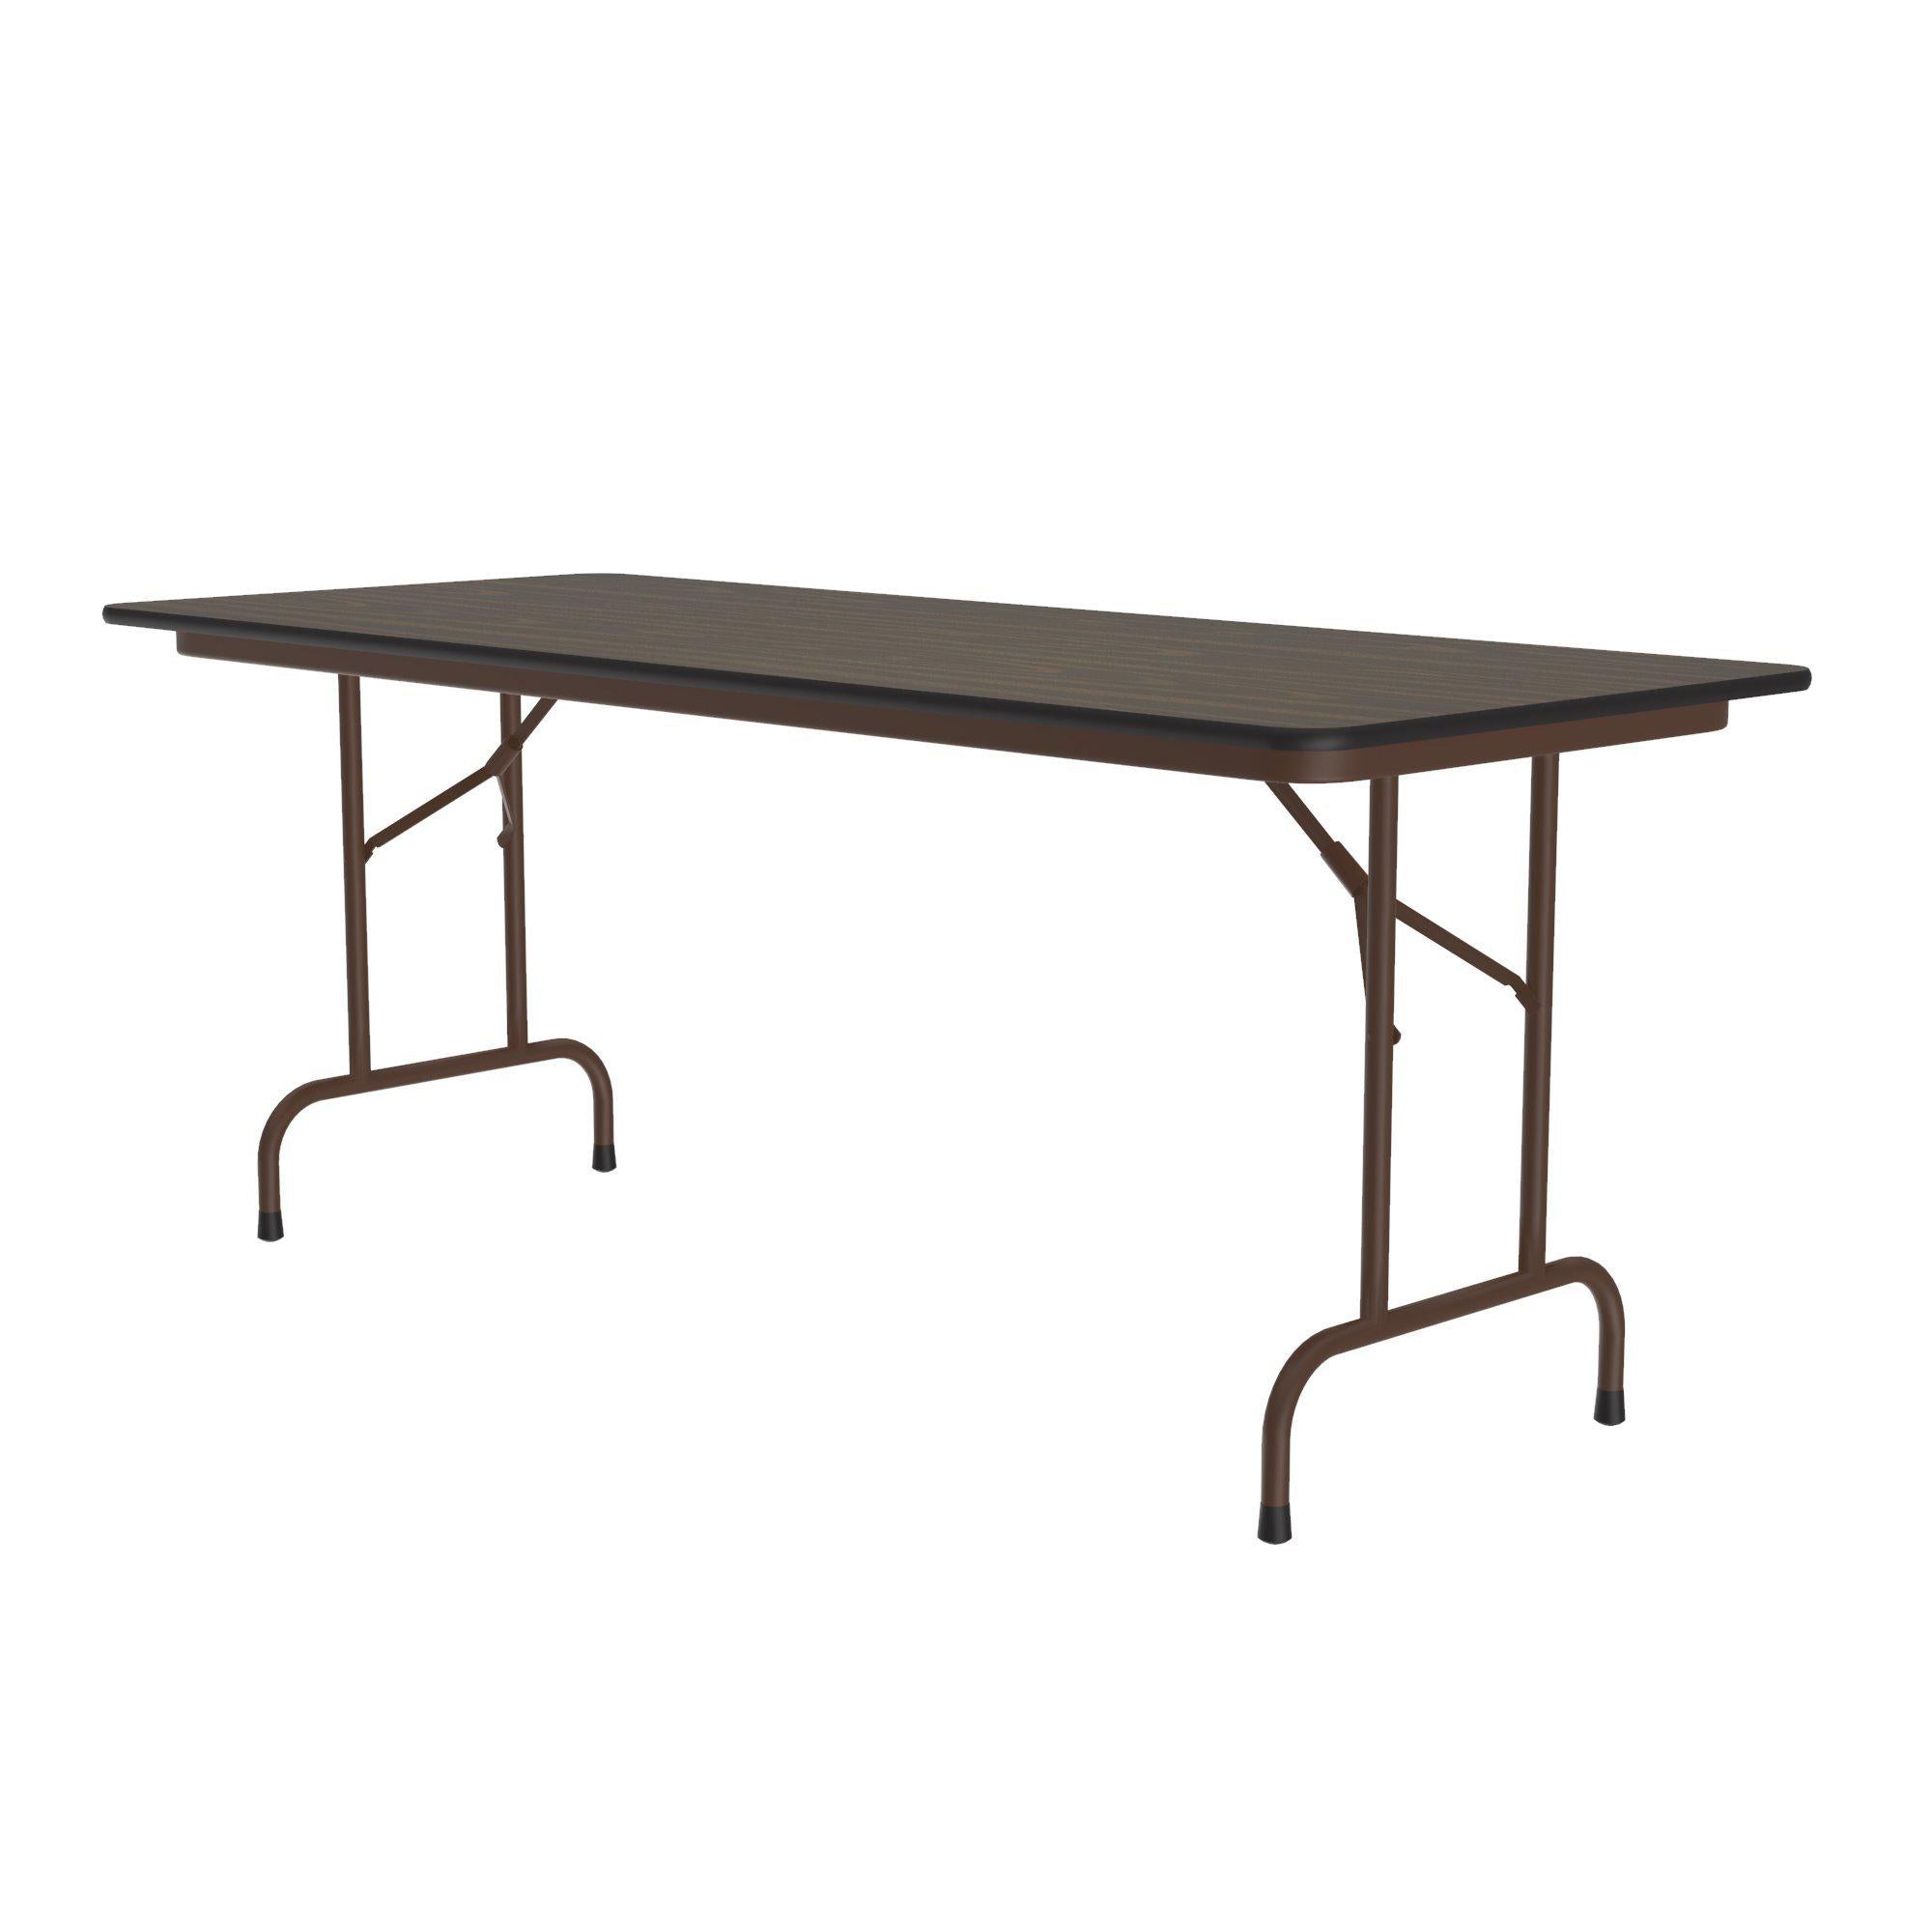 Solid Plywood Core Folding Table, Premium High-Pressure Laminate Top, 29" Fixed Height, 30" x 72"